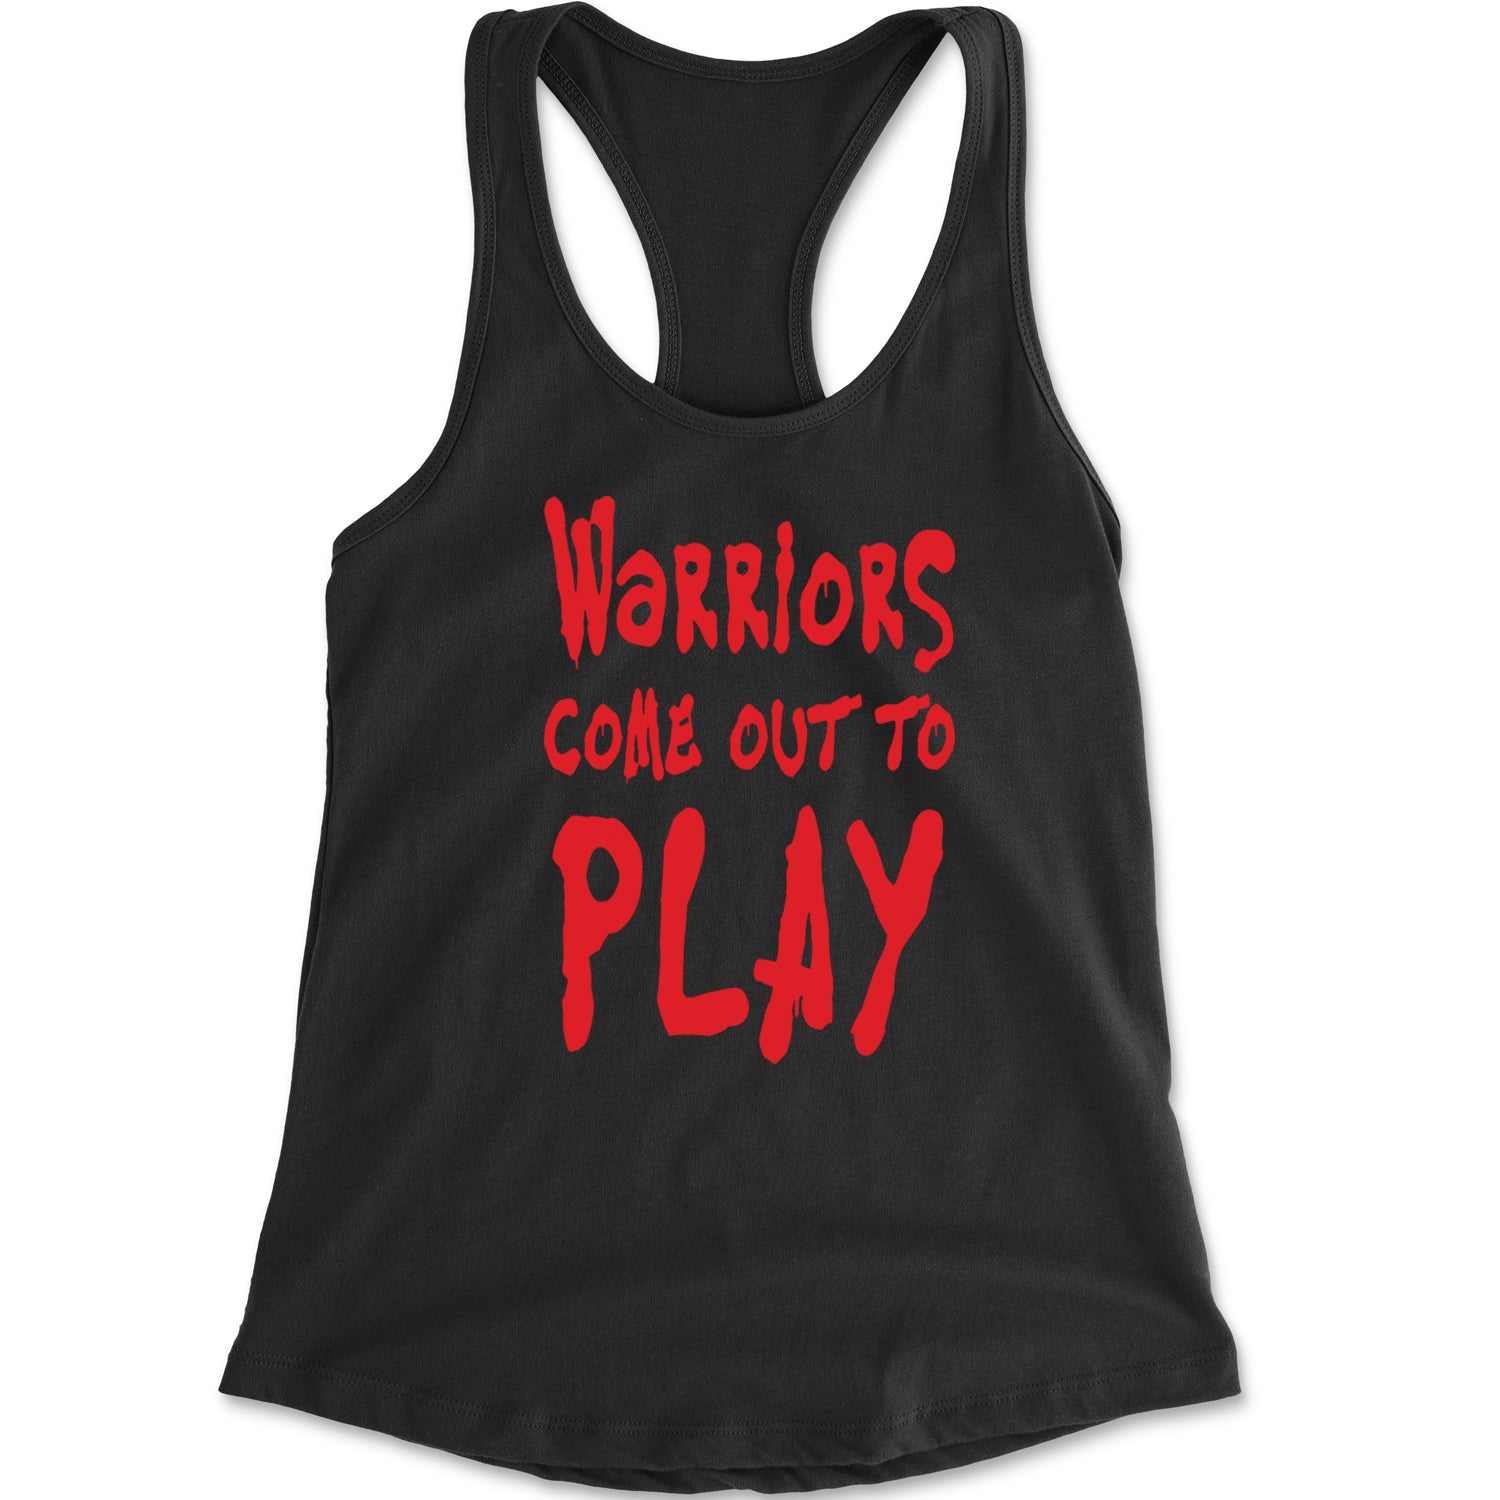 Warriors Come Out To Play  Racerback Tank Top for Women